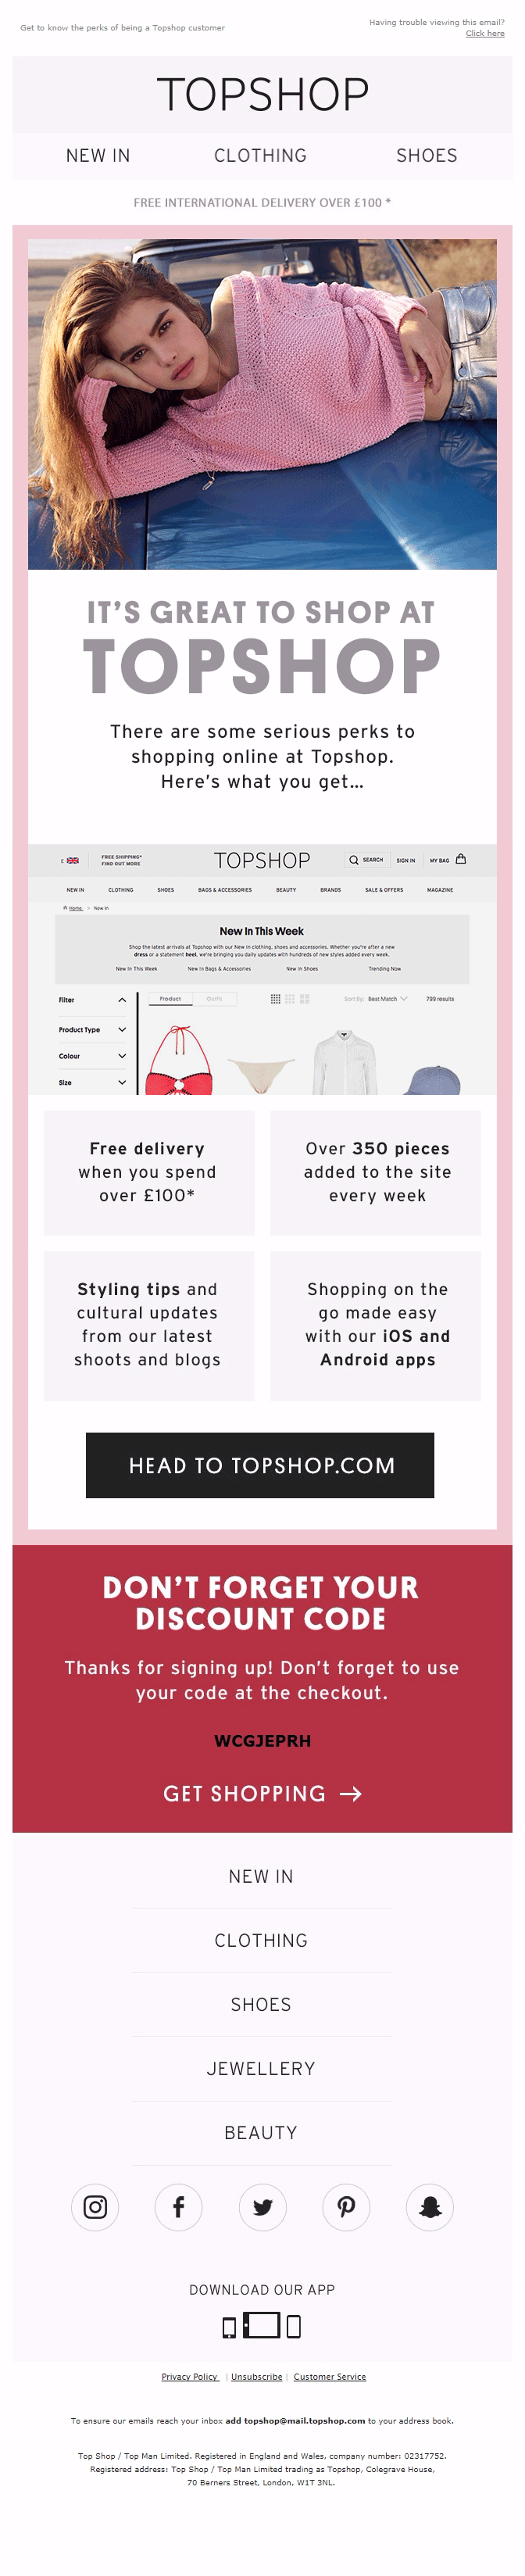 the second email in TopShop welcome series